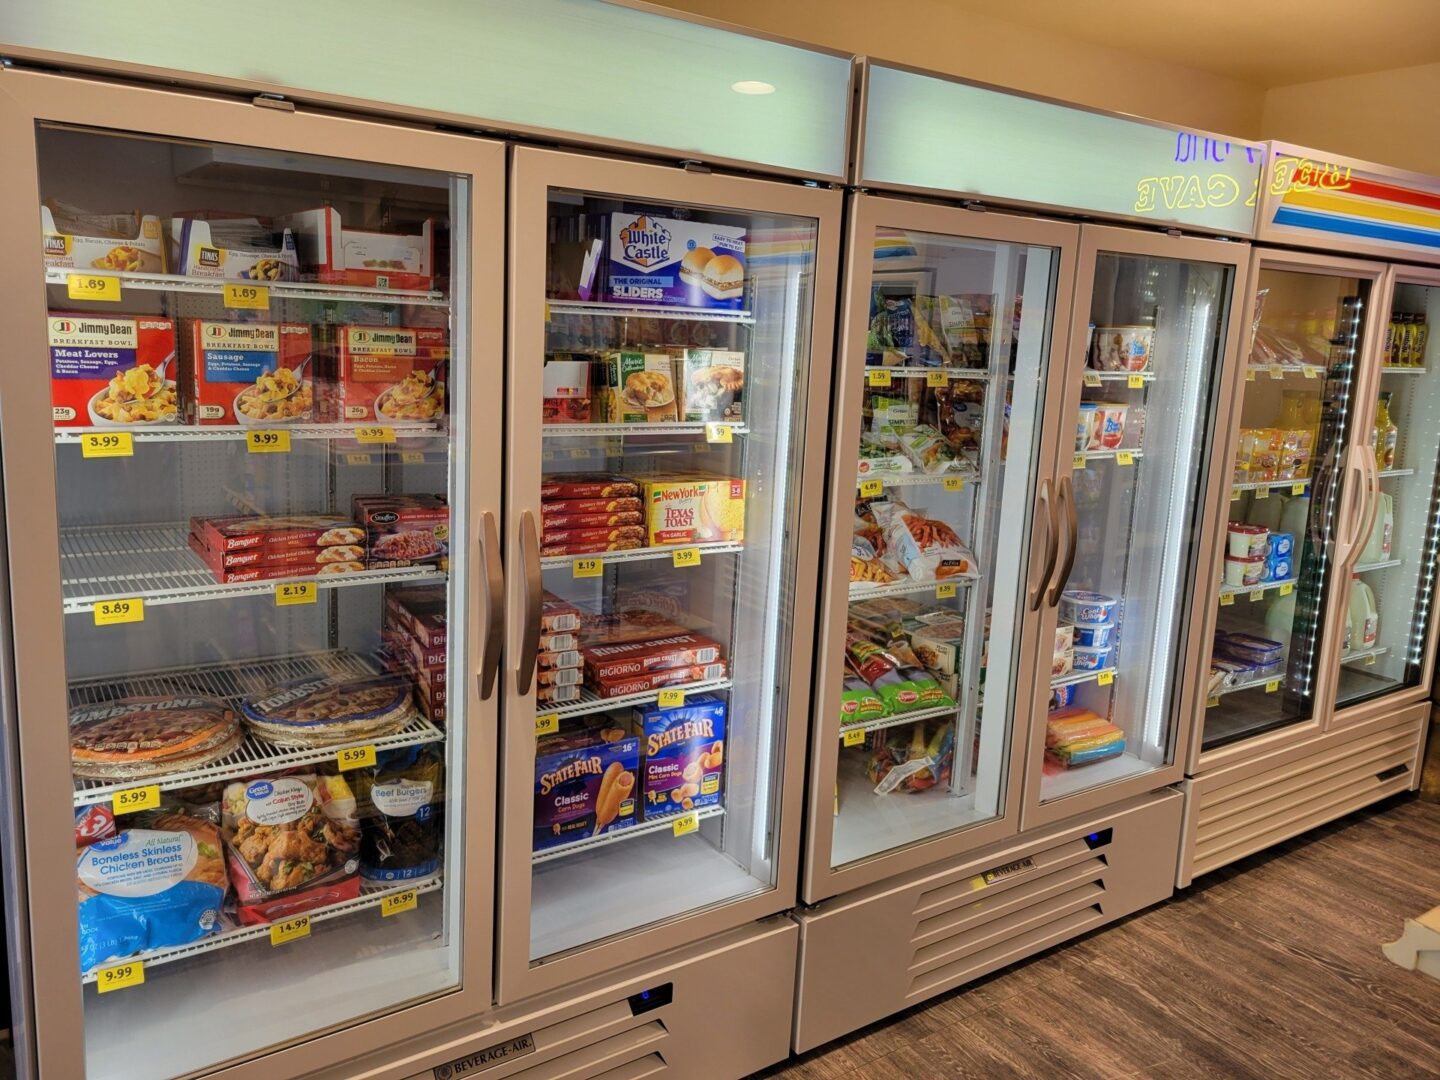 A large display freezer filled with lots of food.